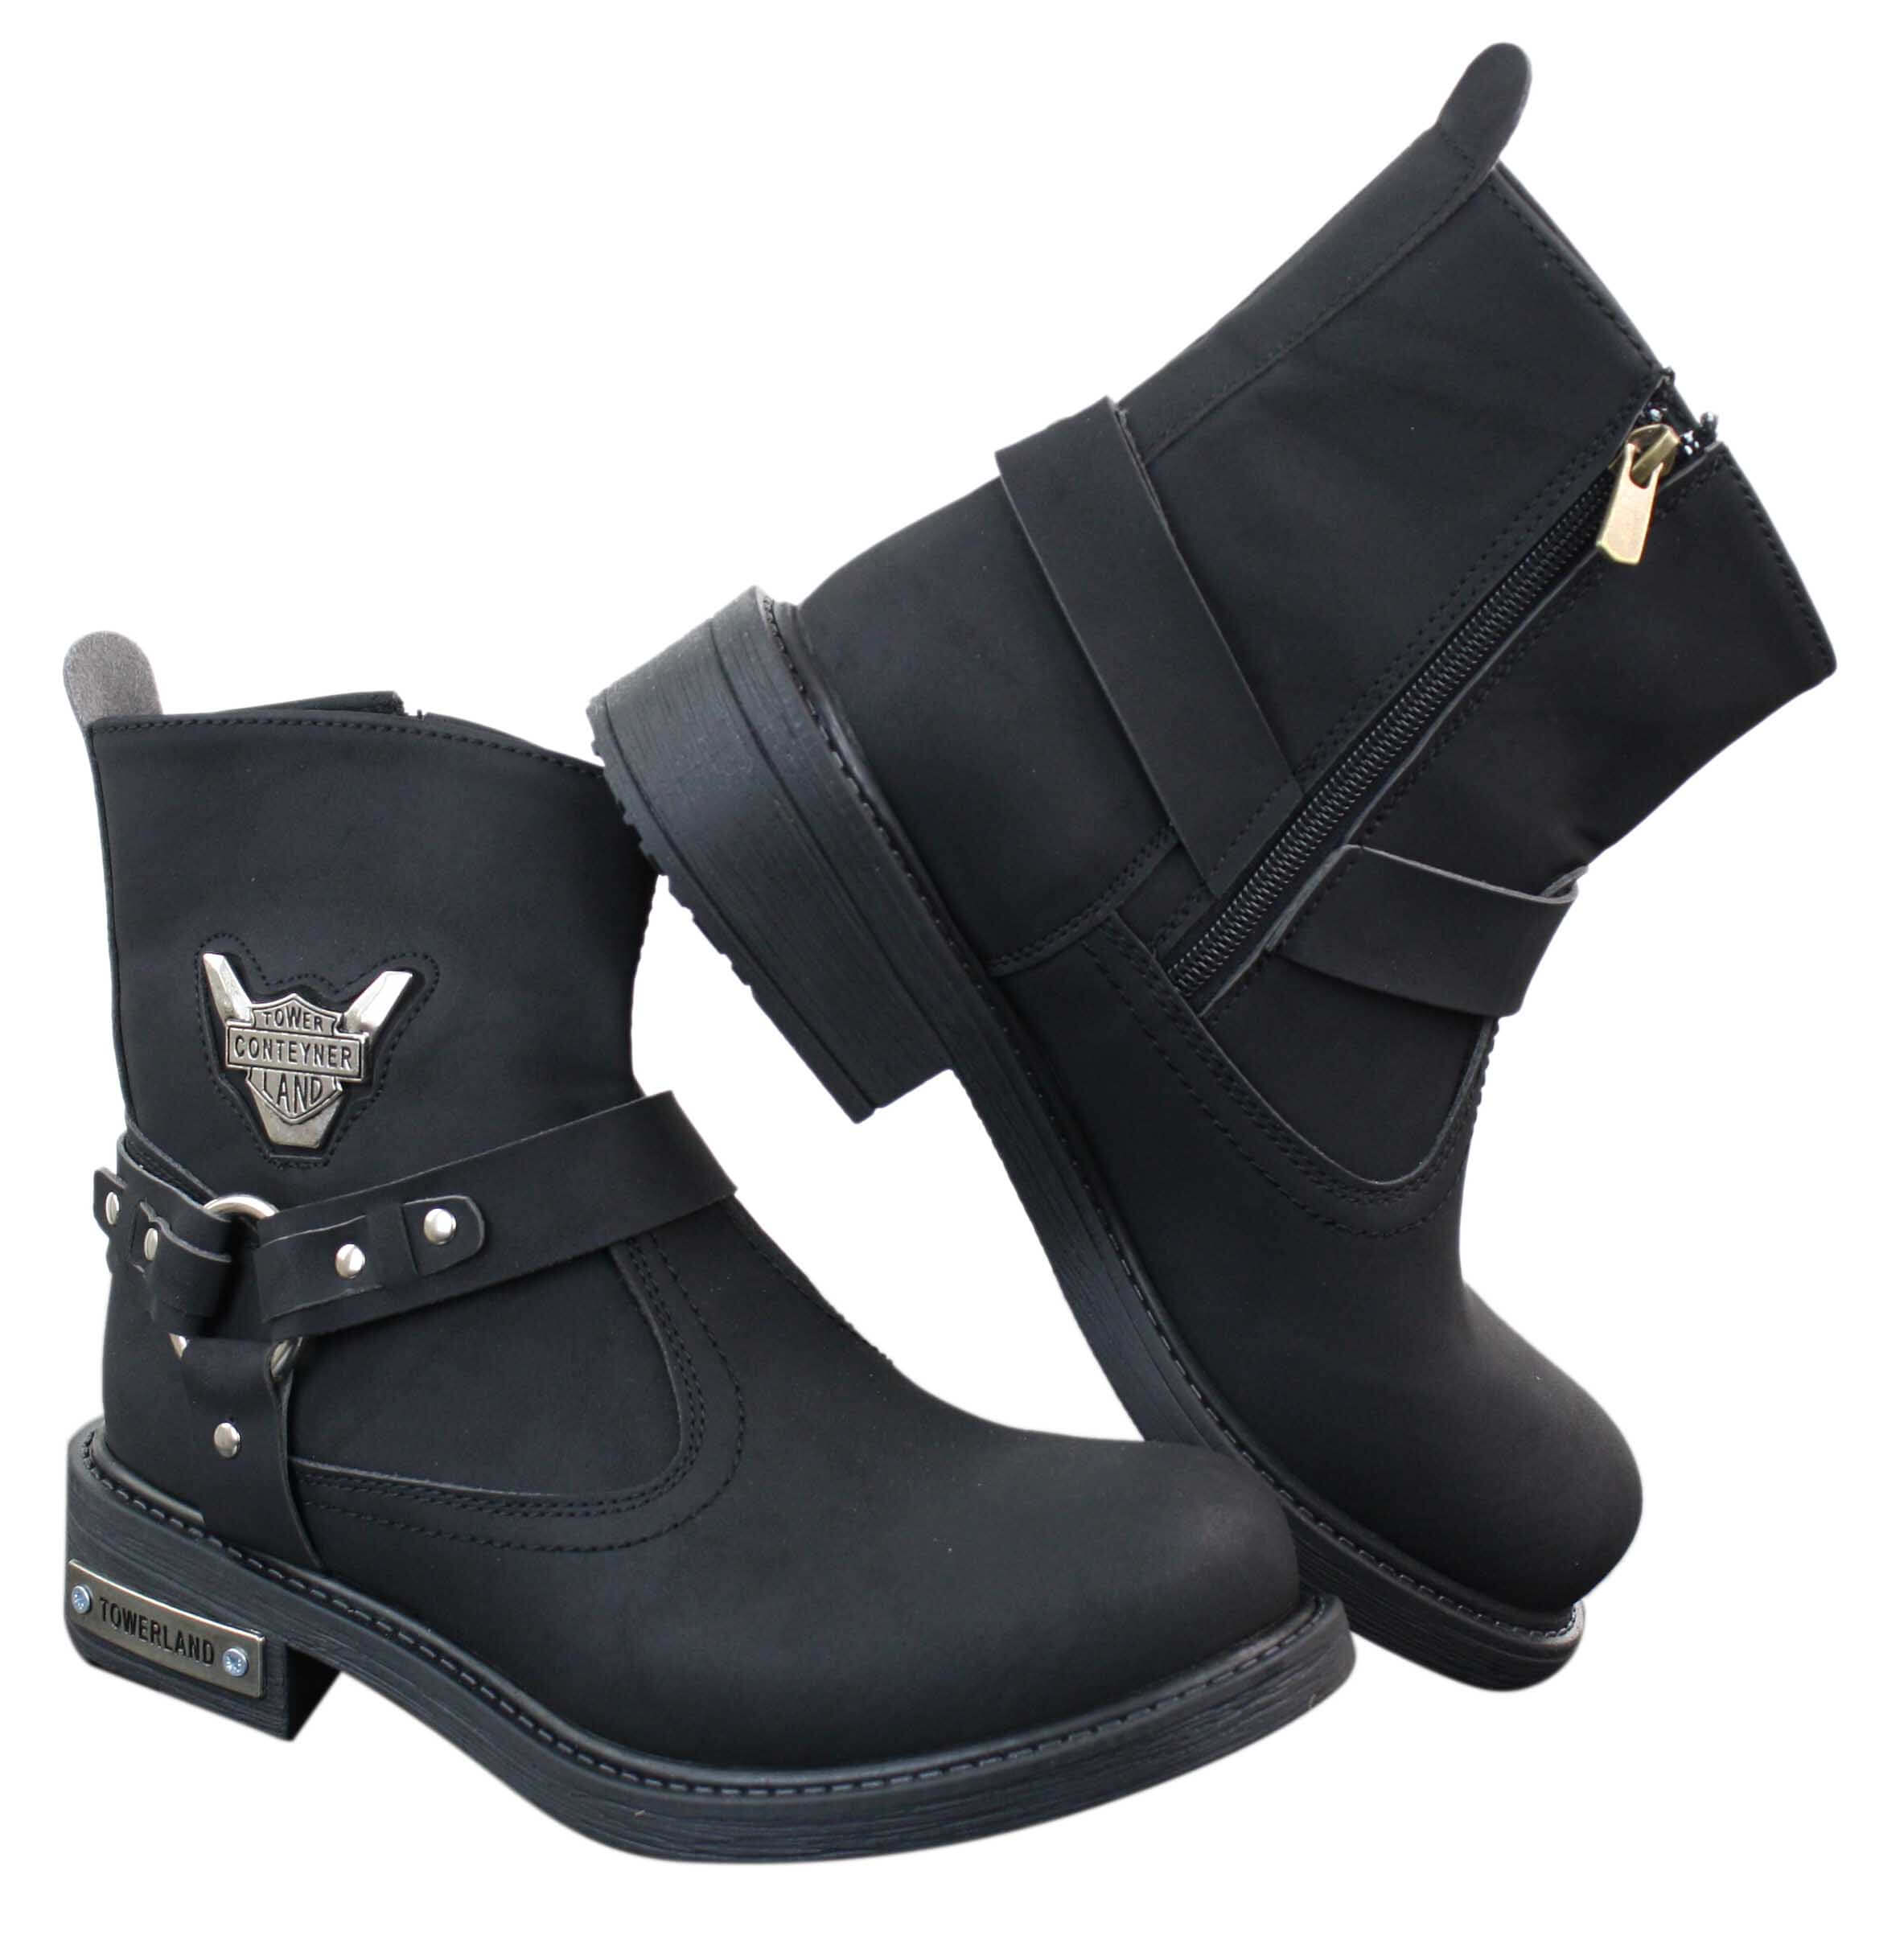 Motorcycle Riding Boots | visitchile.cl